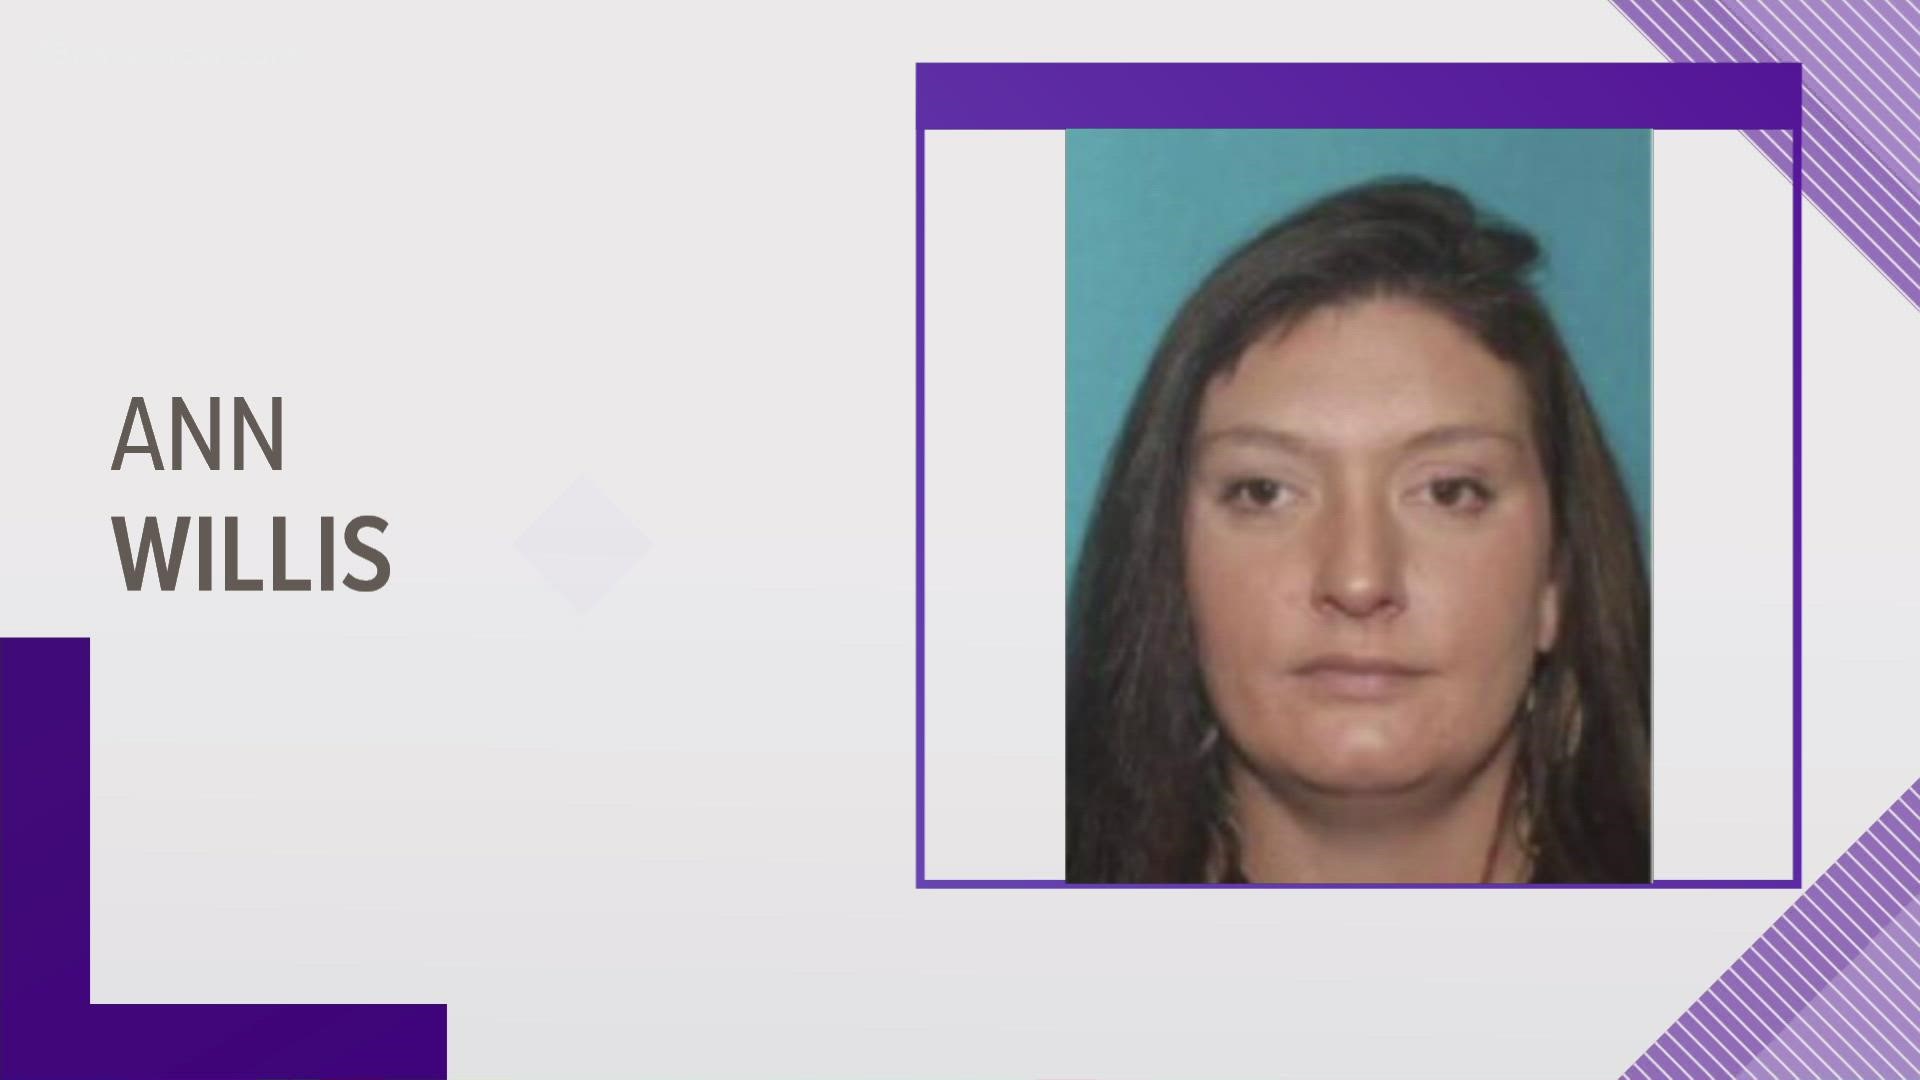 The Carteret County Sheriff's Office said the last time Ann Mare Willis had any contact with her family was on July 1, 2021.